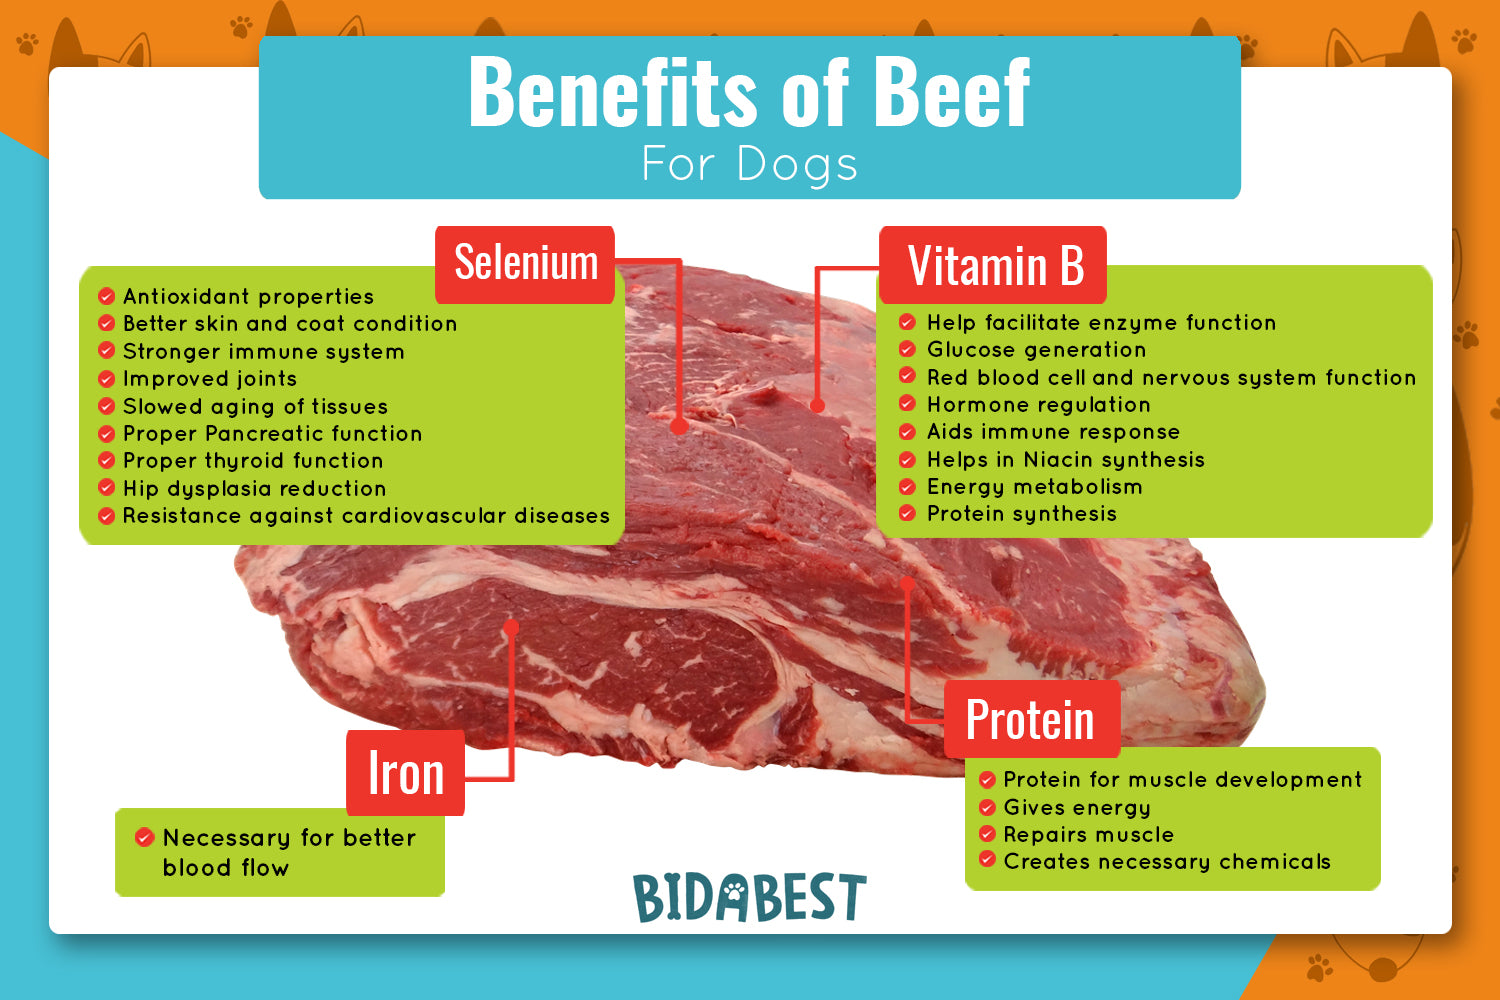 Benefits of beef for dogs